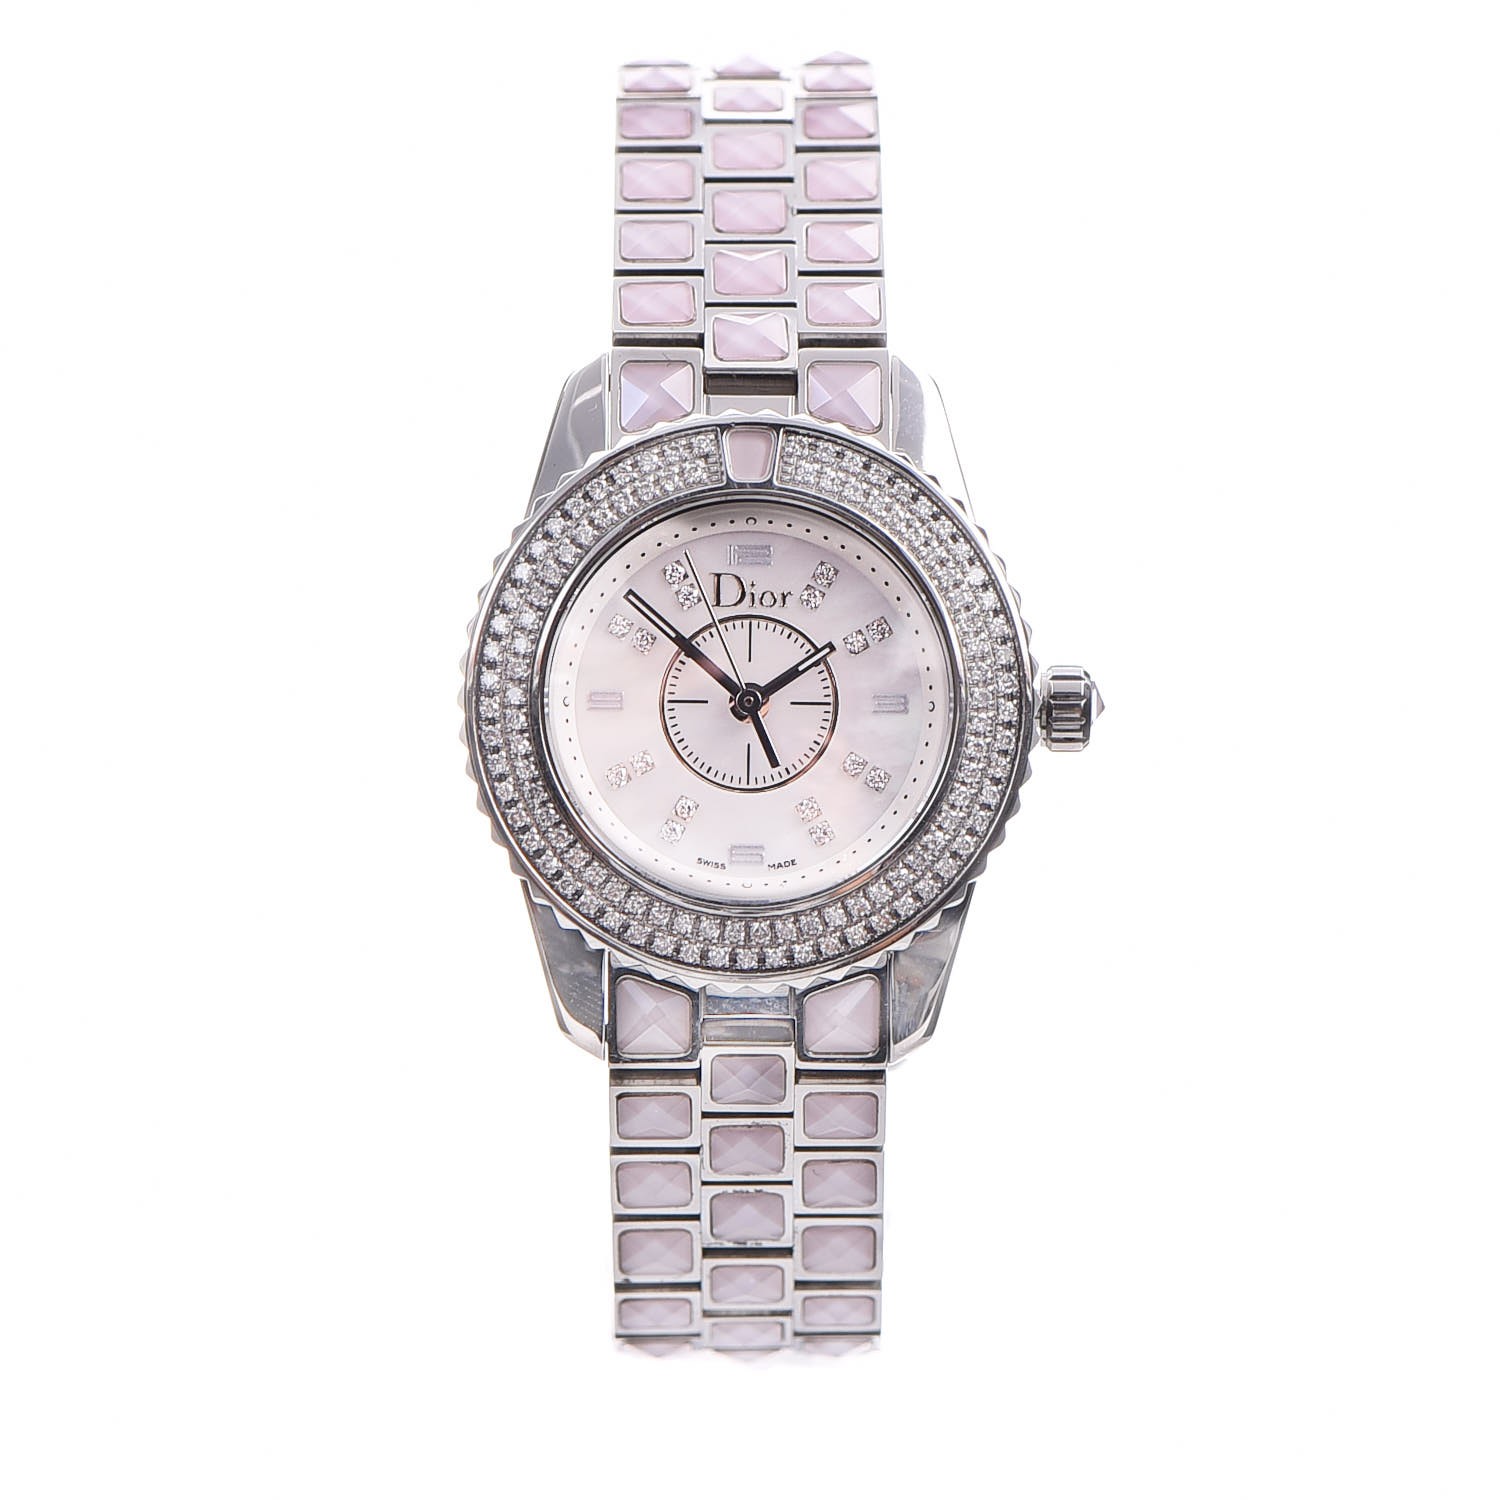 CHRISTIAN DIOR Stainless Steel Diamond 29mm Les Montres Watch Light